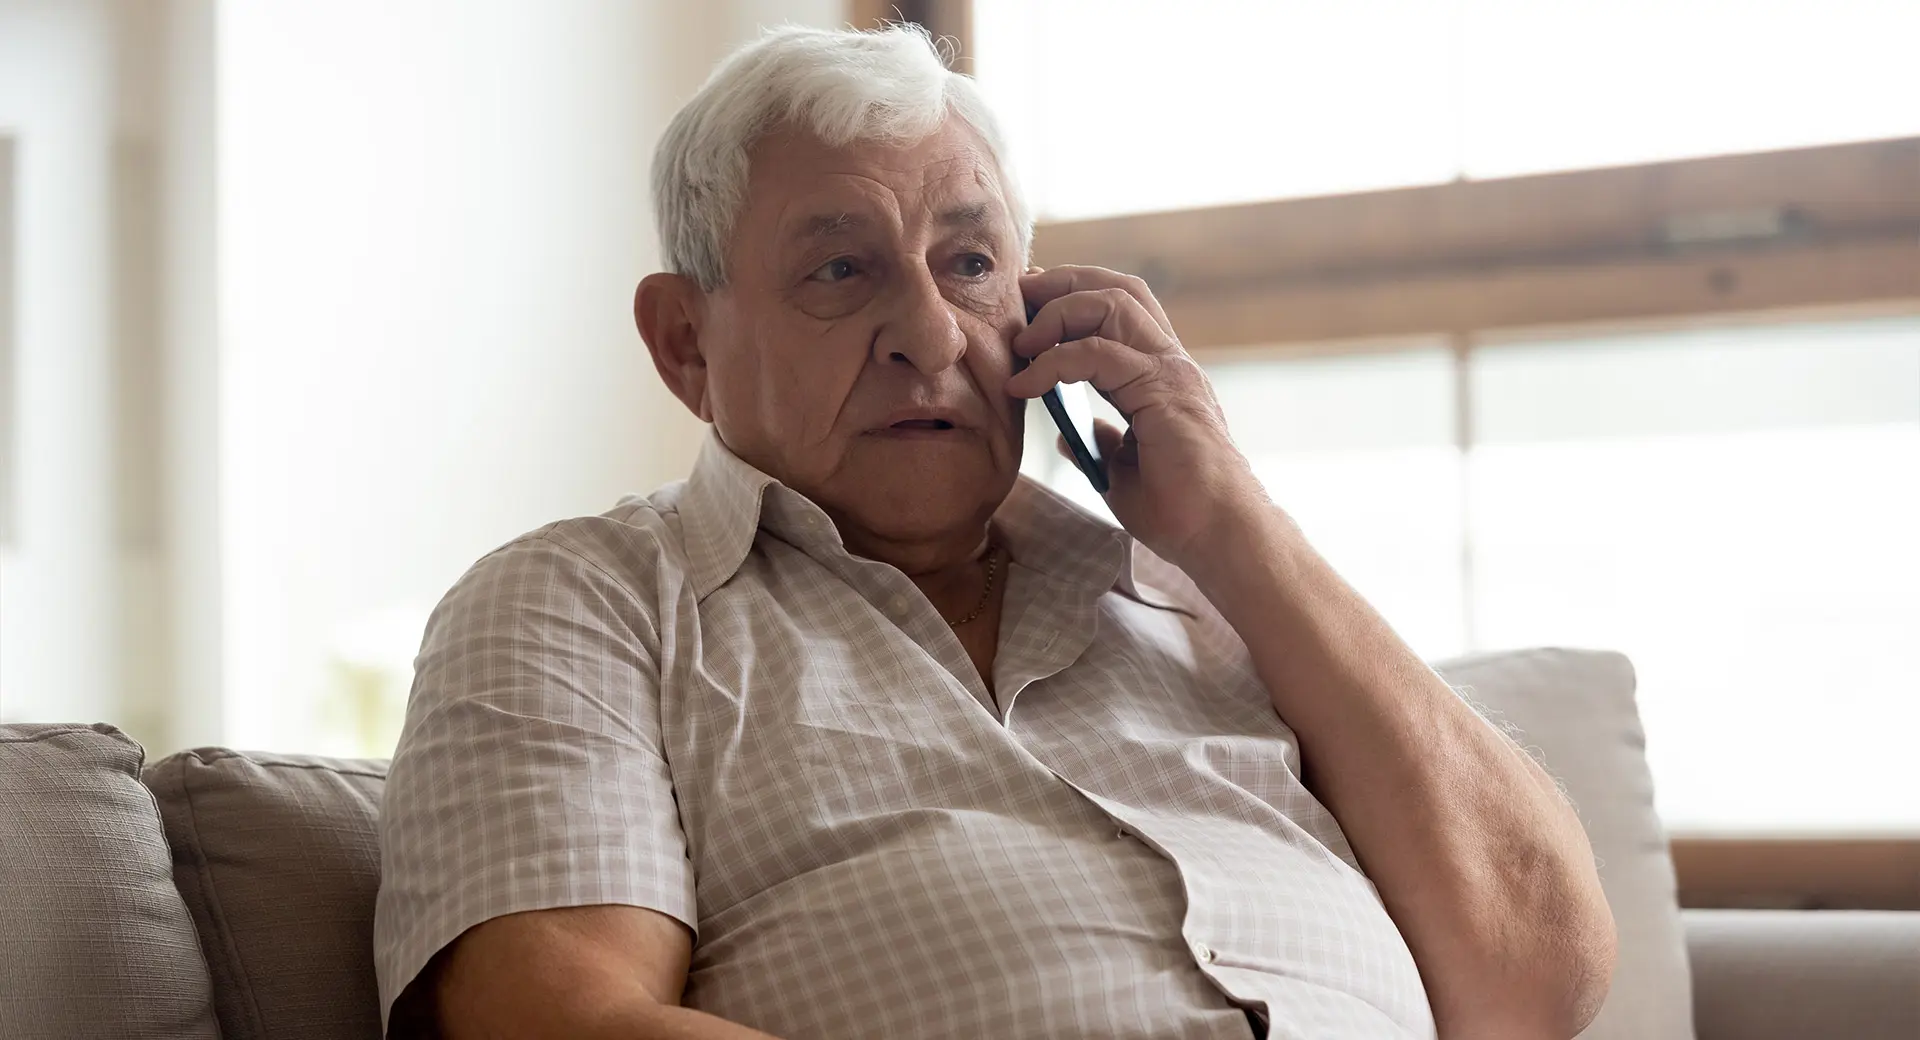 An older person holds a mobile phone up to their ear